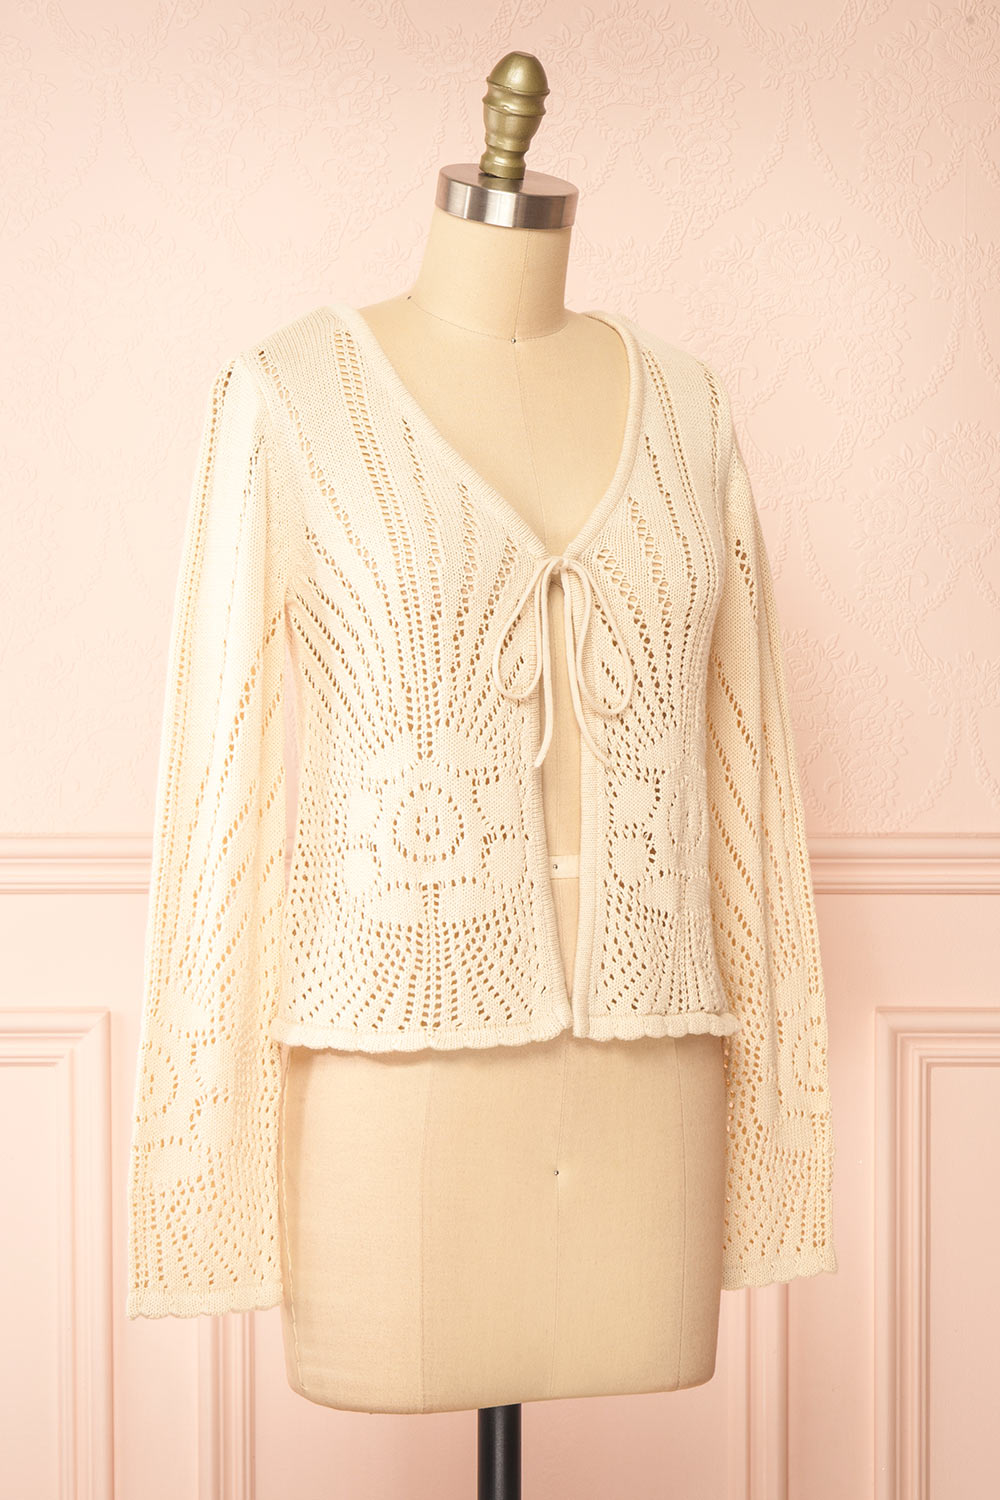 Hayle Beige Knit Cardigan | Boutique 1861 side view